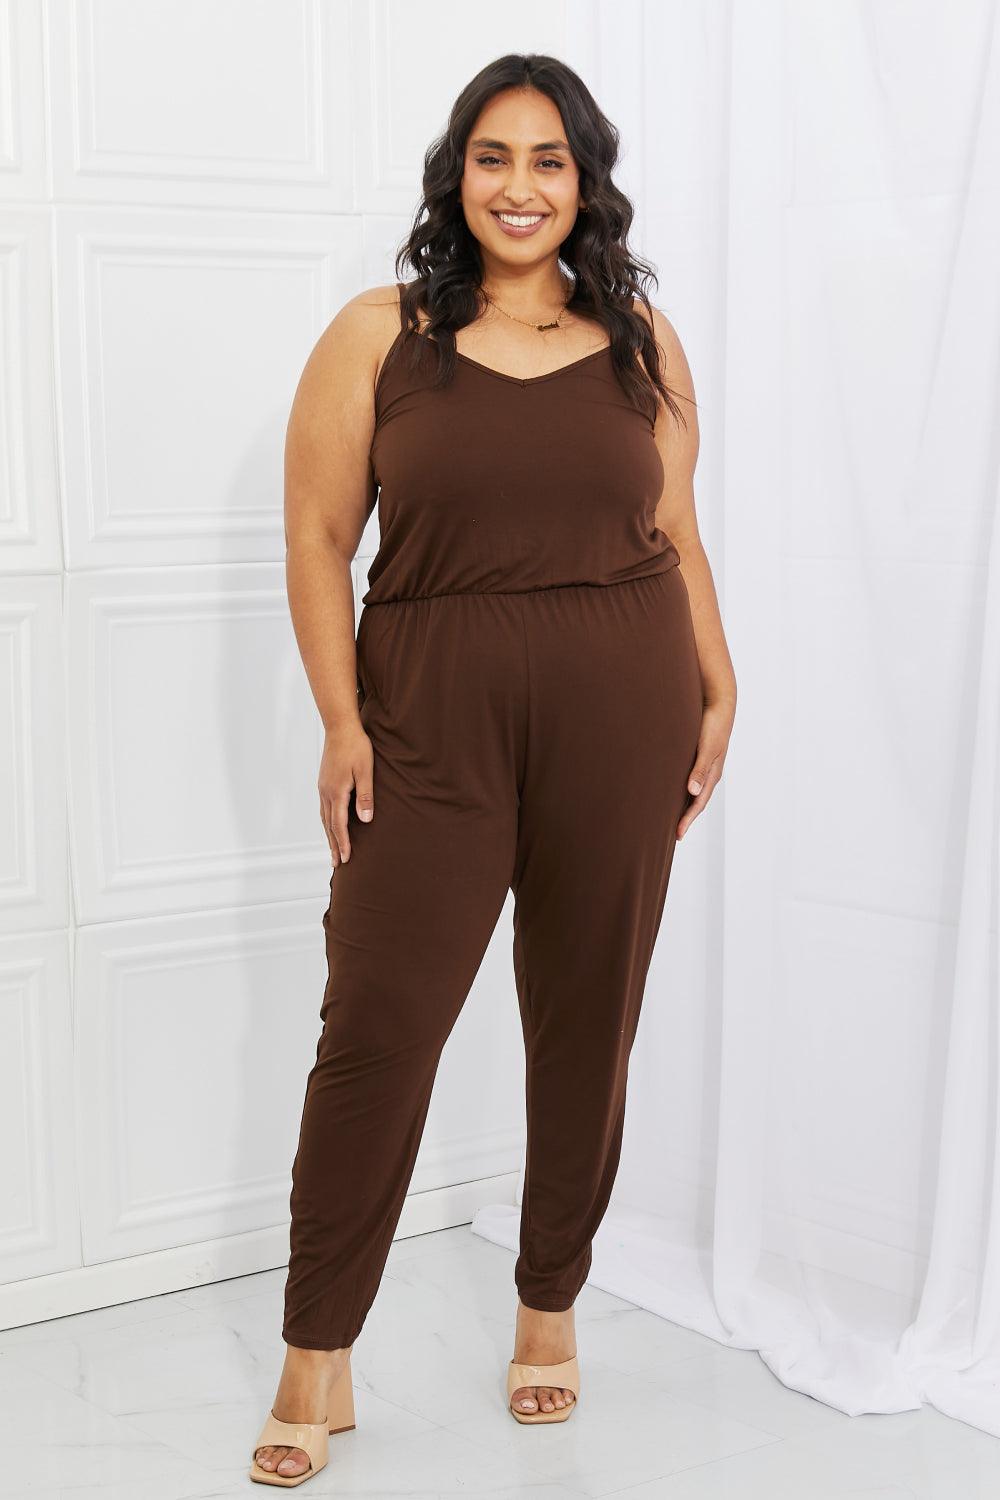 Capella Comfy Casual Full Size Solid Elastic Waistband Jumpsuit in Chocolate - AMIClubwear